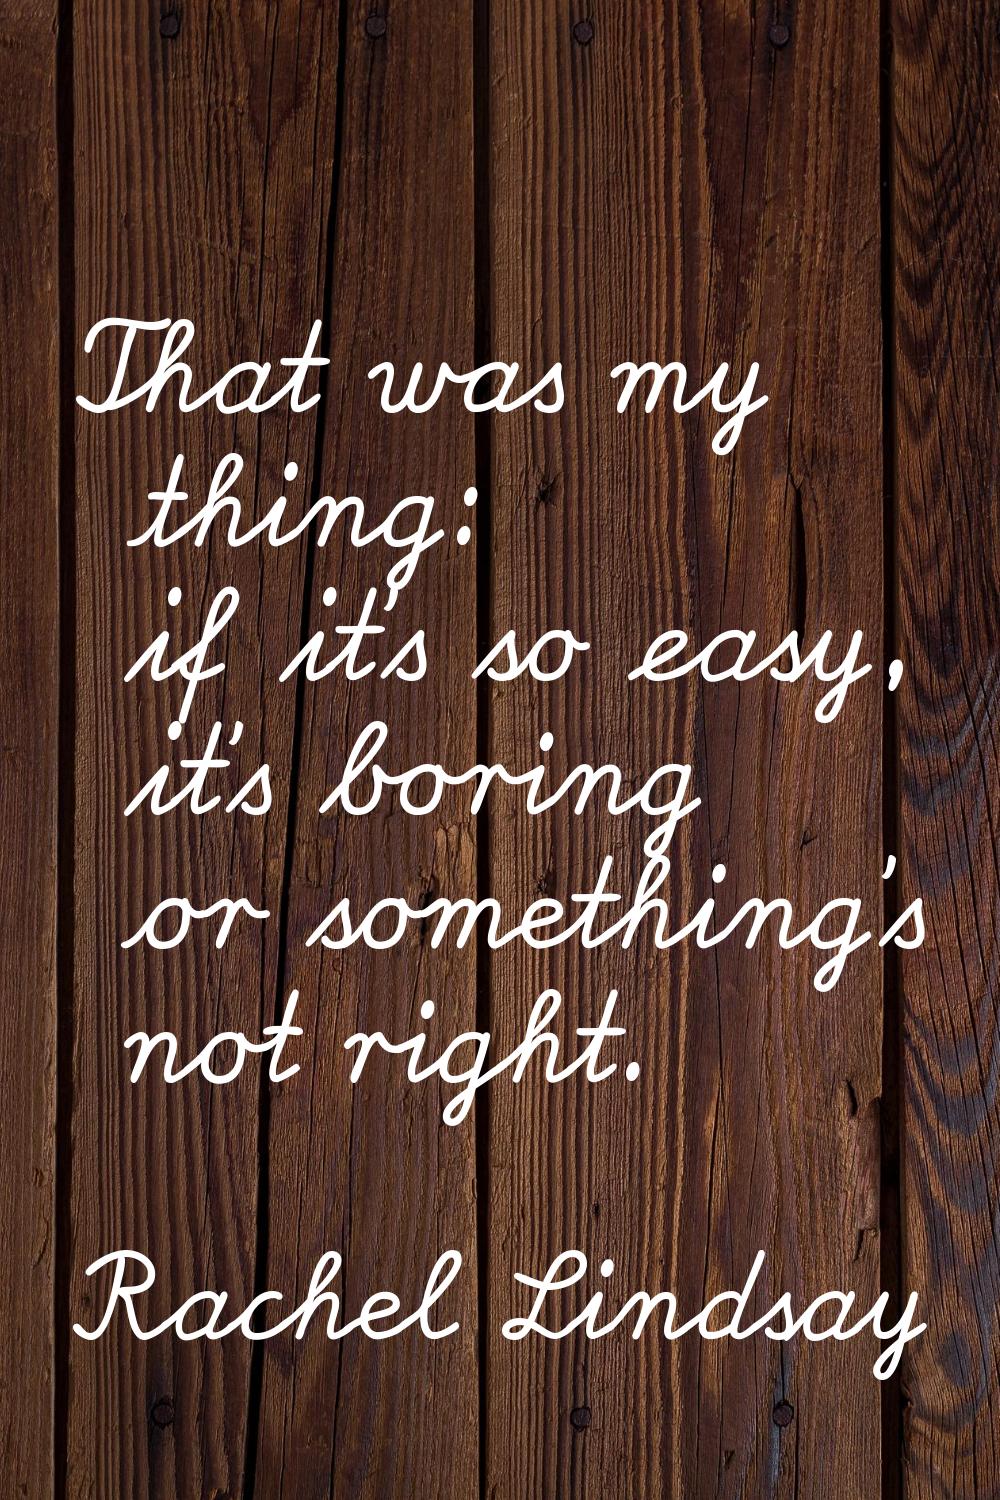 That was my thing: if it's so easy, it's boring or something's not right.